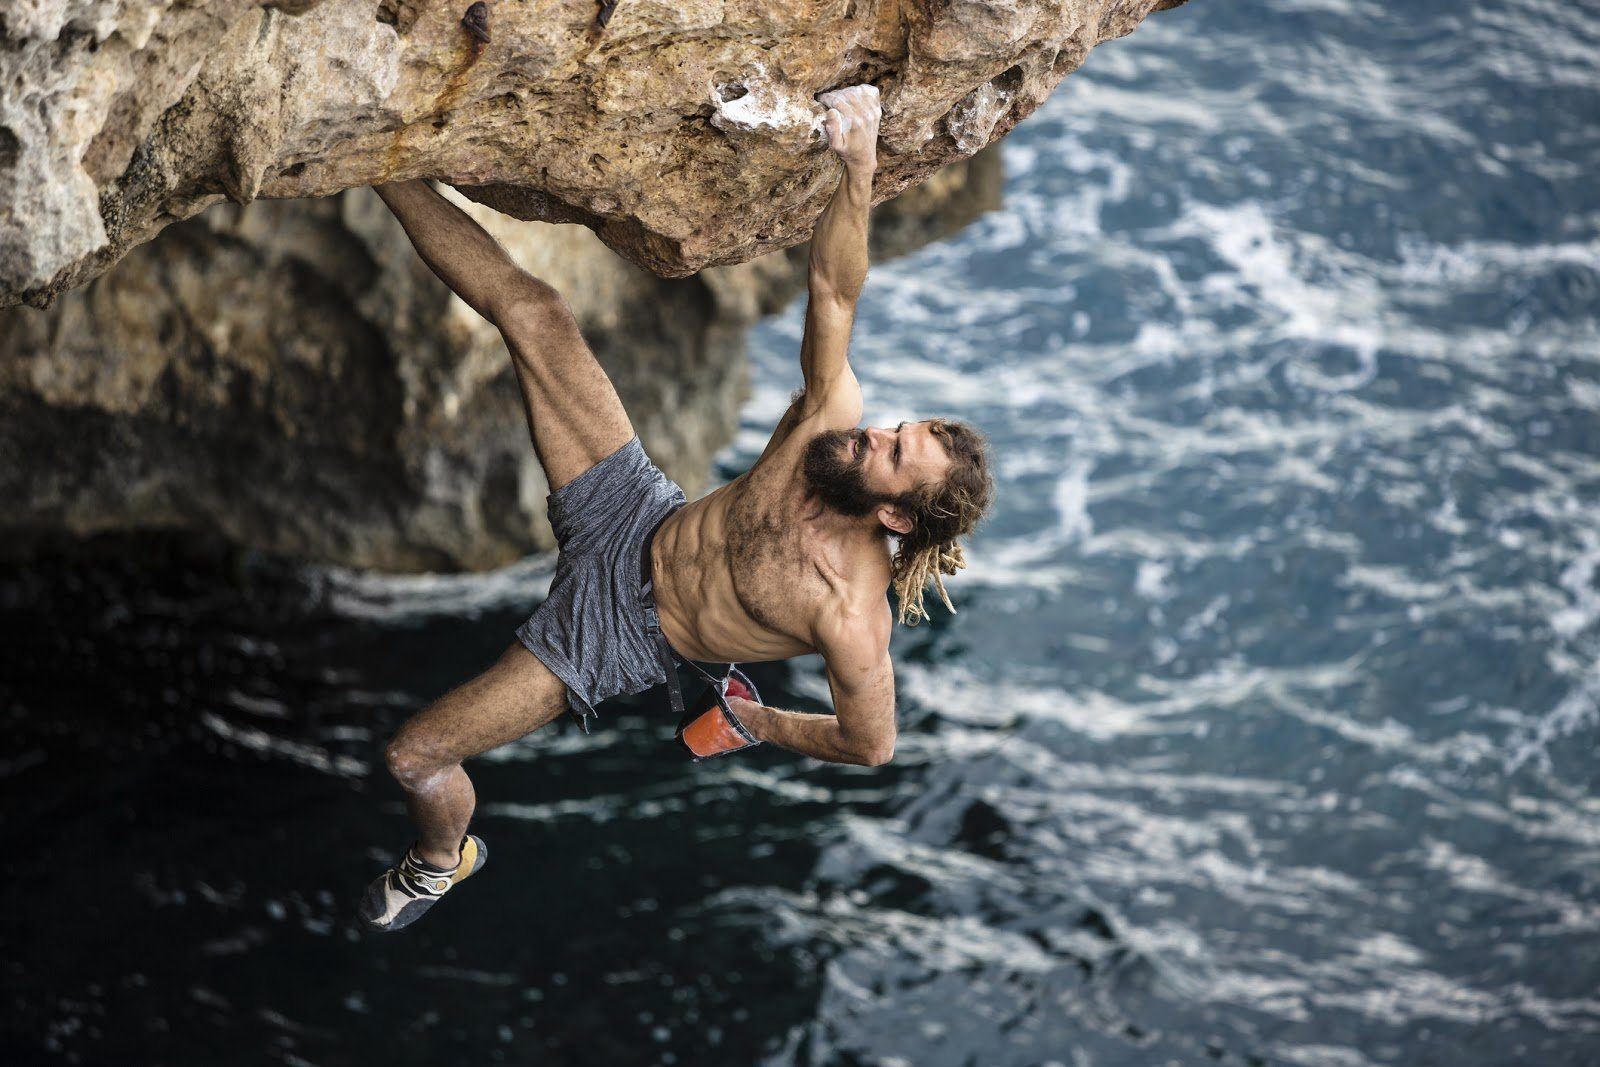 Know More About Free Soloing And The Best Merino Blend Socks – Meriwool